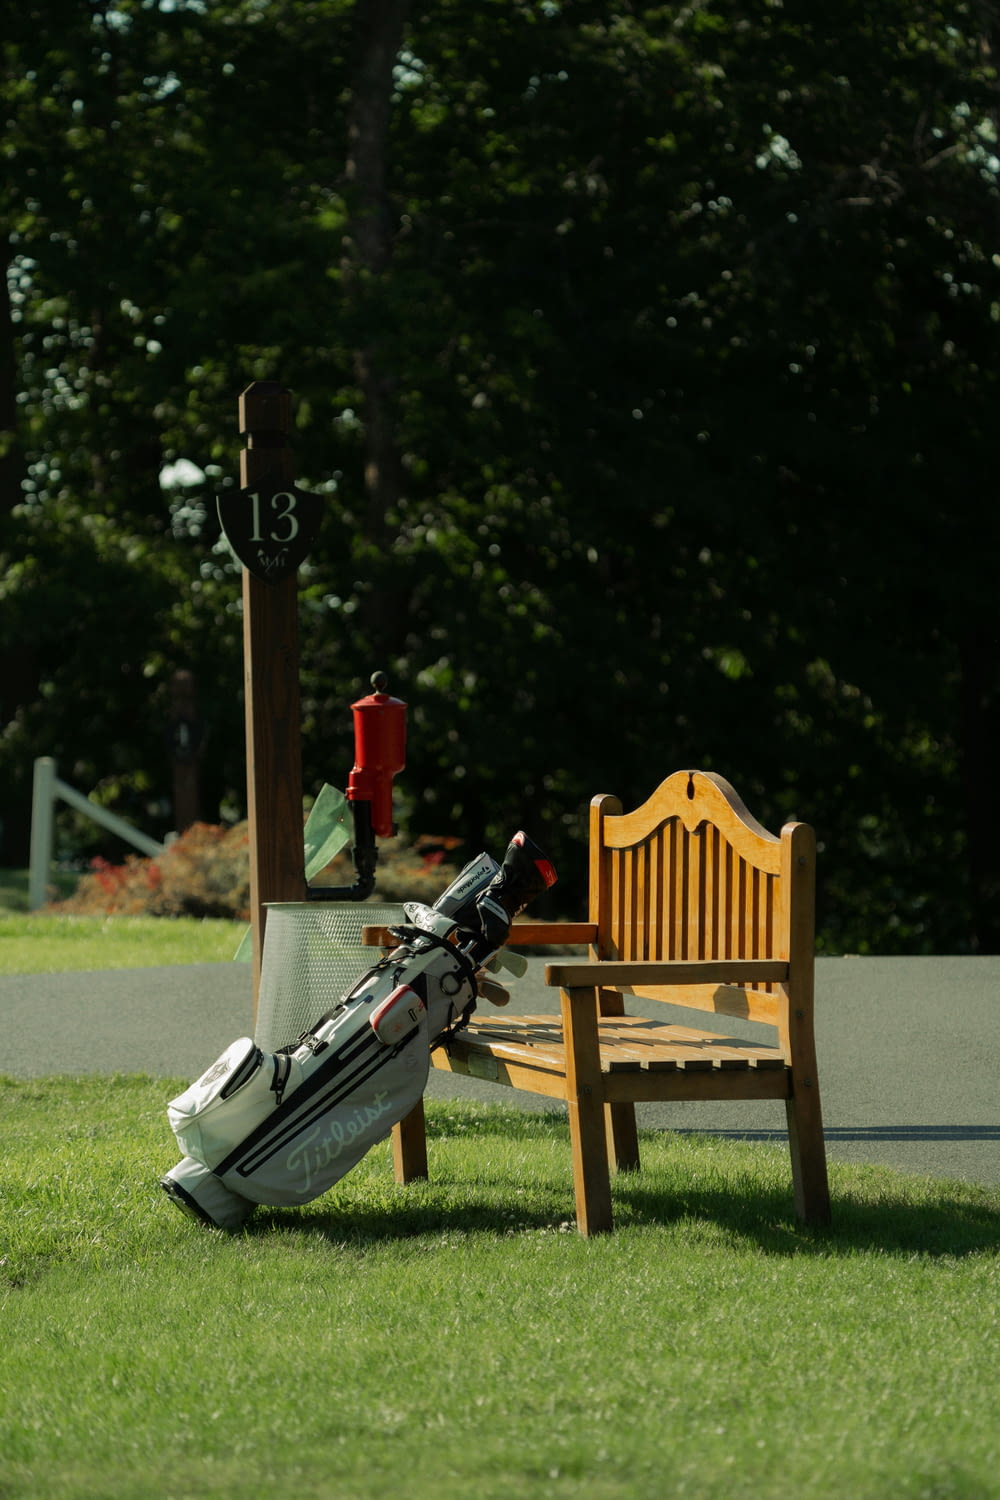 a wooden bench sitting in the grass next to a golf bag